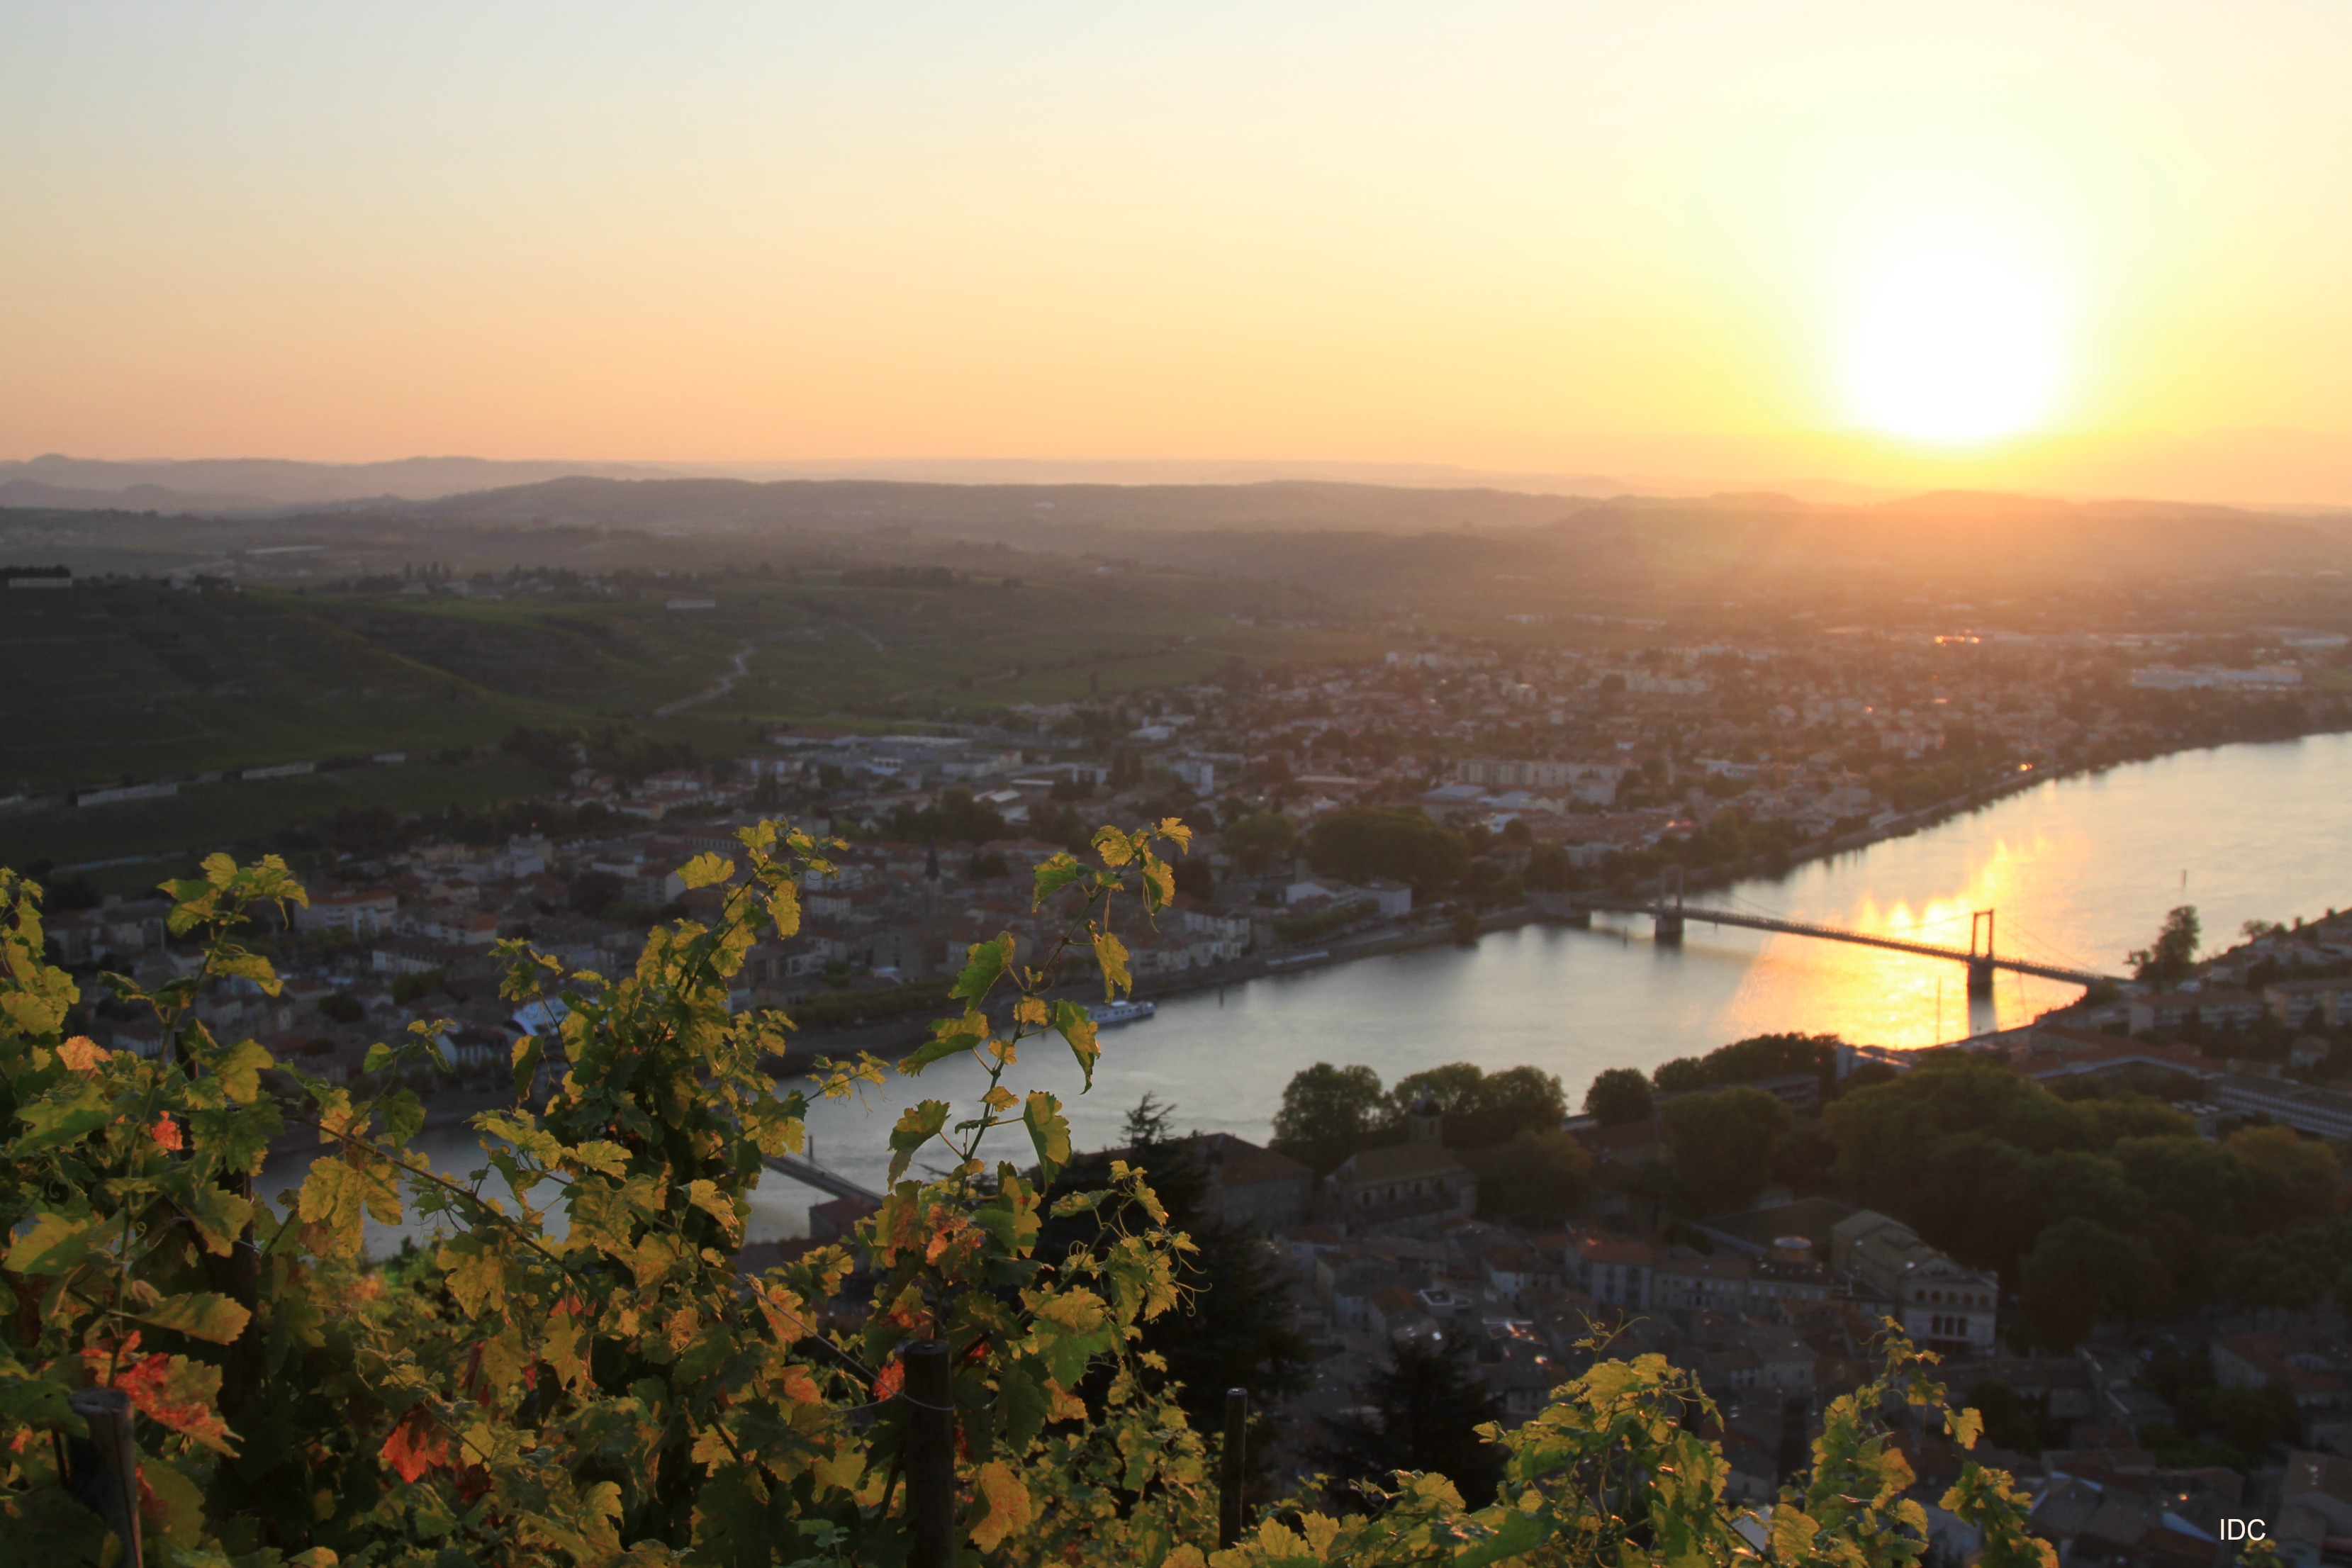 "Overlooking the Rhone and its tributaries"